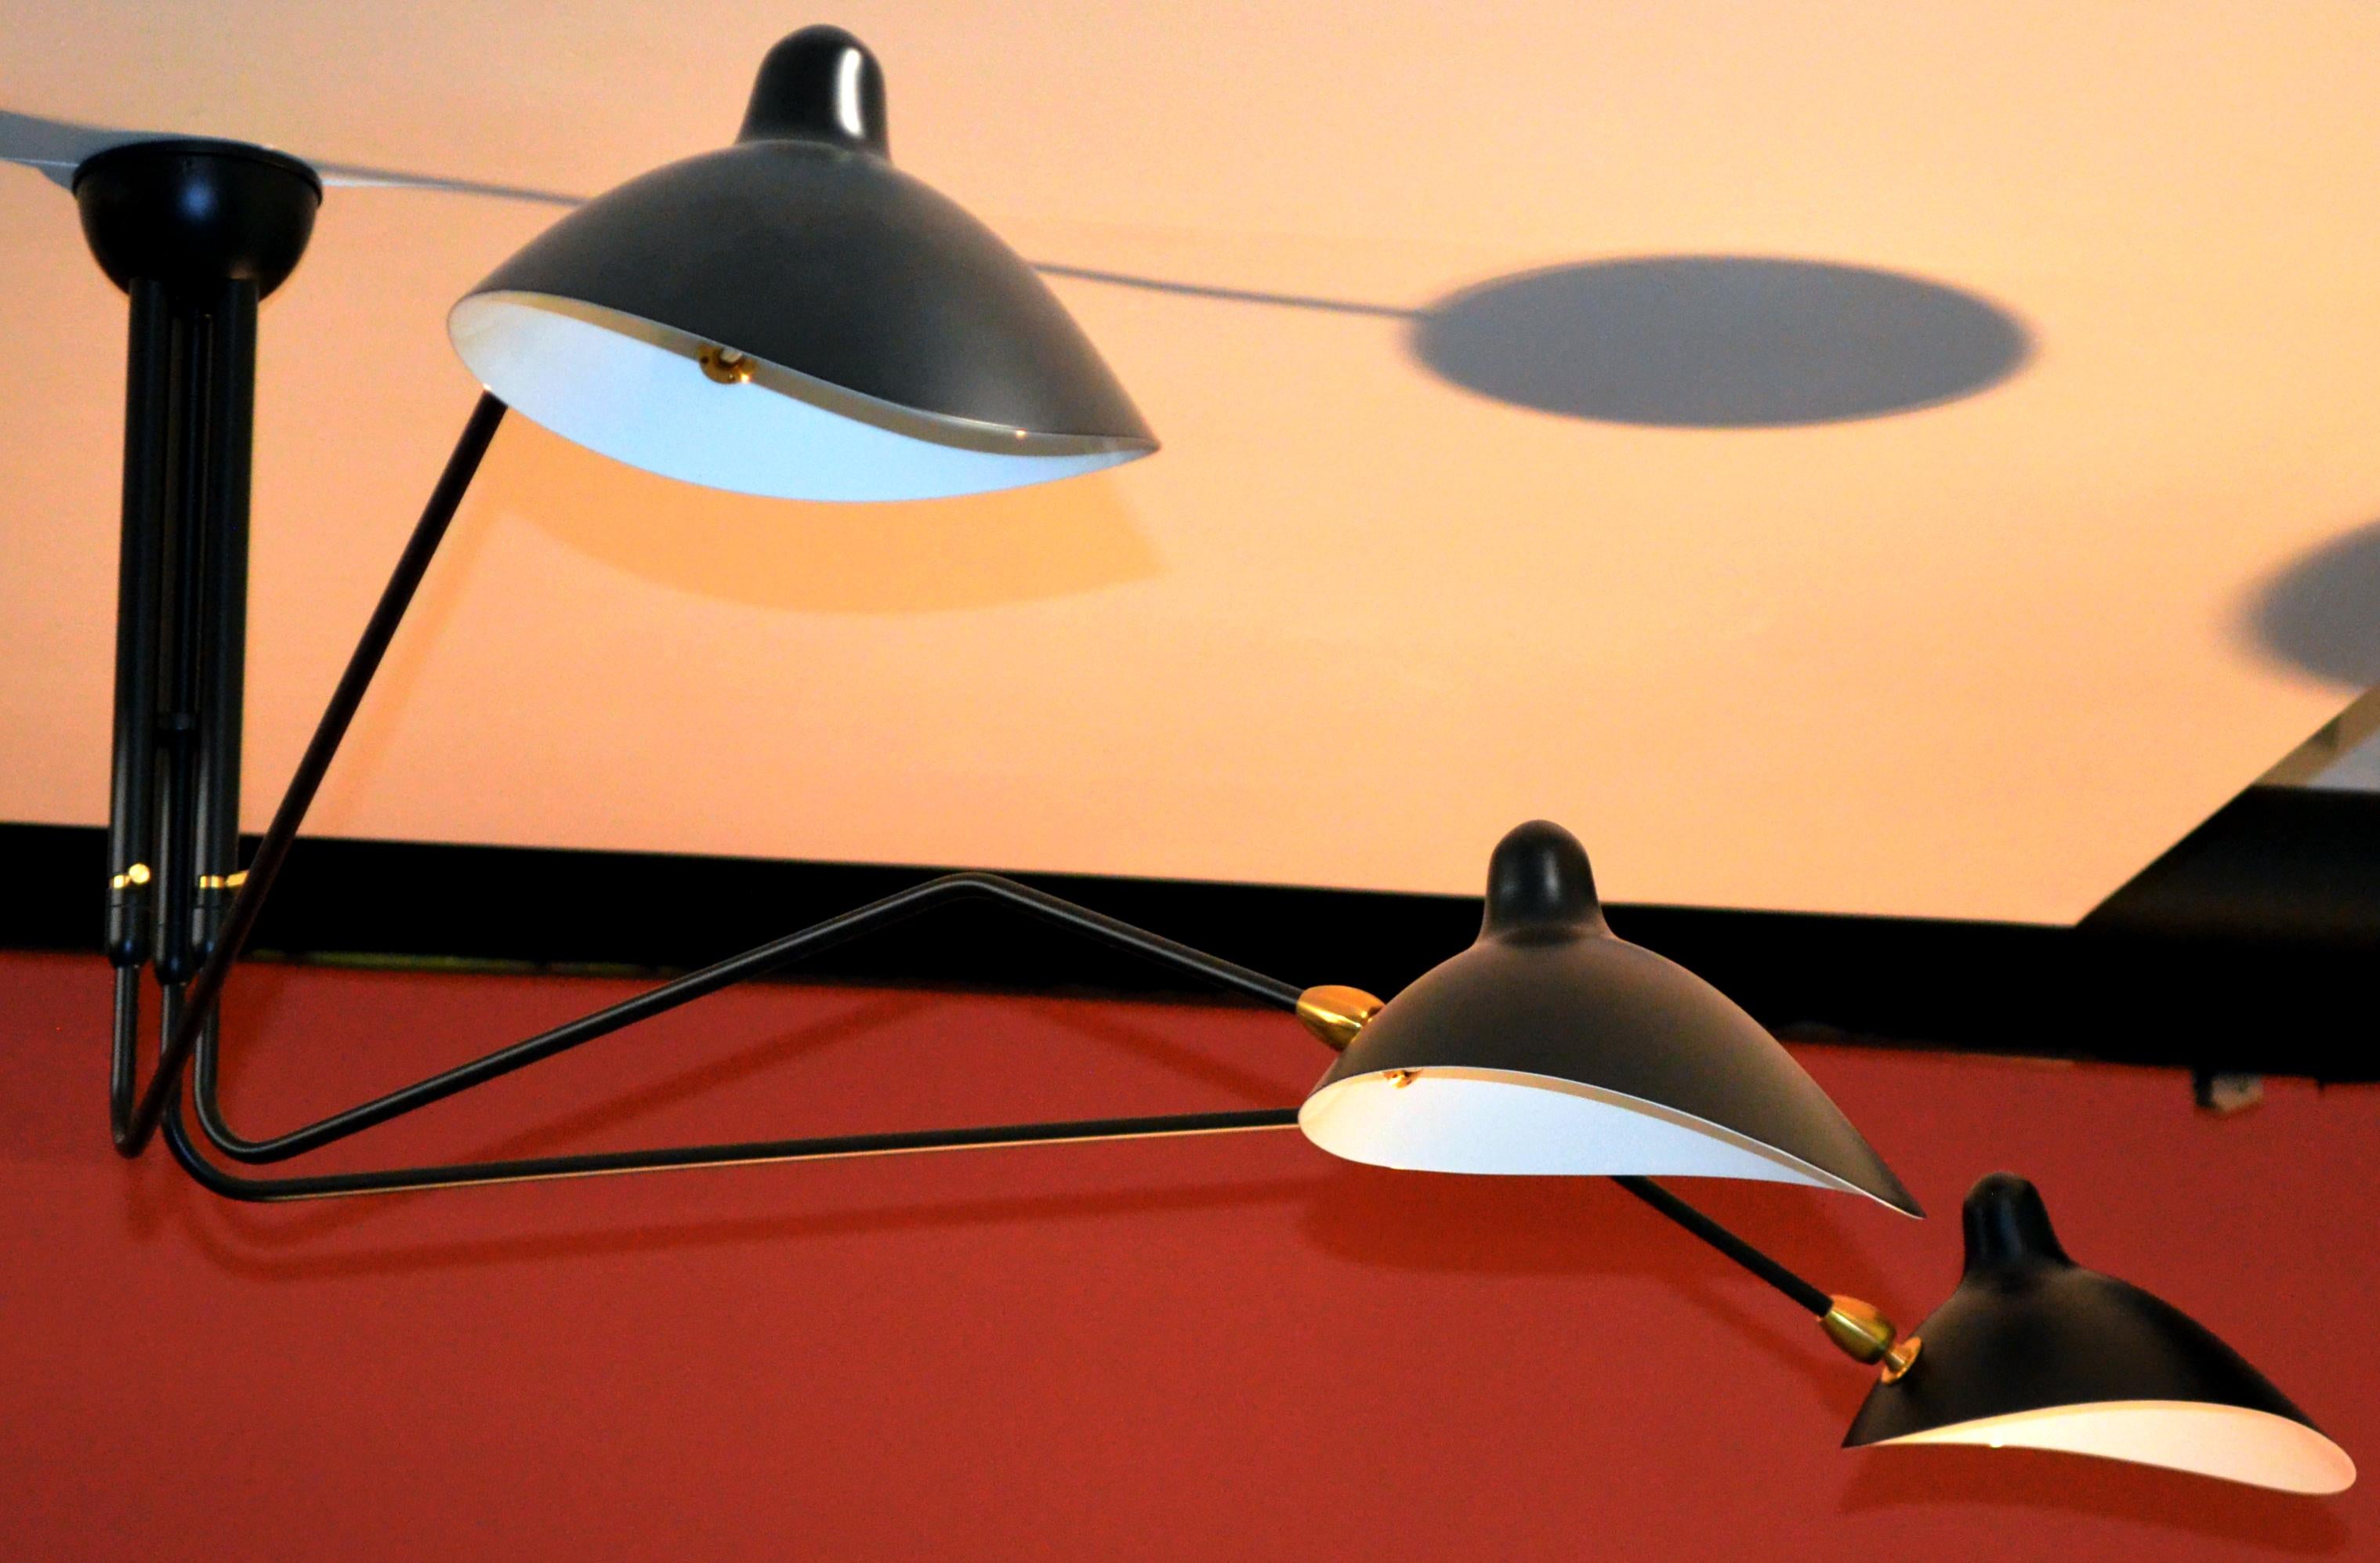 Serge Mouille - Black Ceiling Lamp with 3 Rotating Arms in White or Black In New Condition For Sale In Stratford, CT